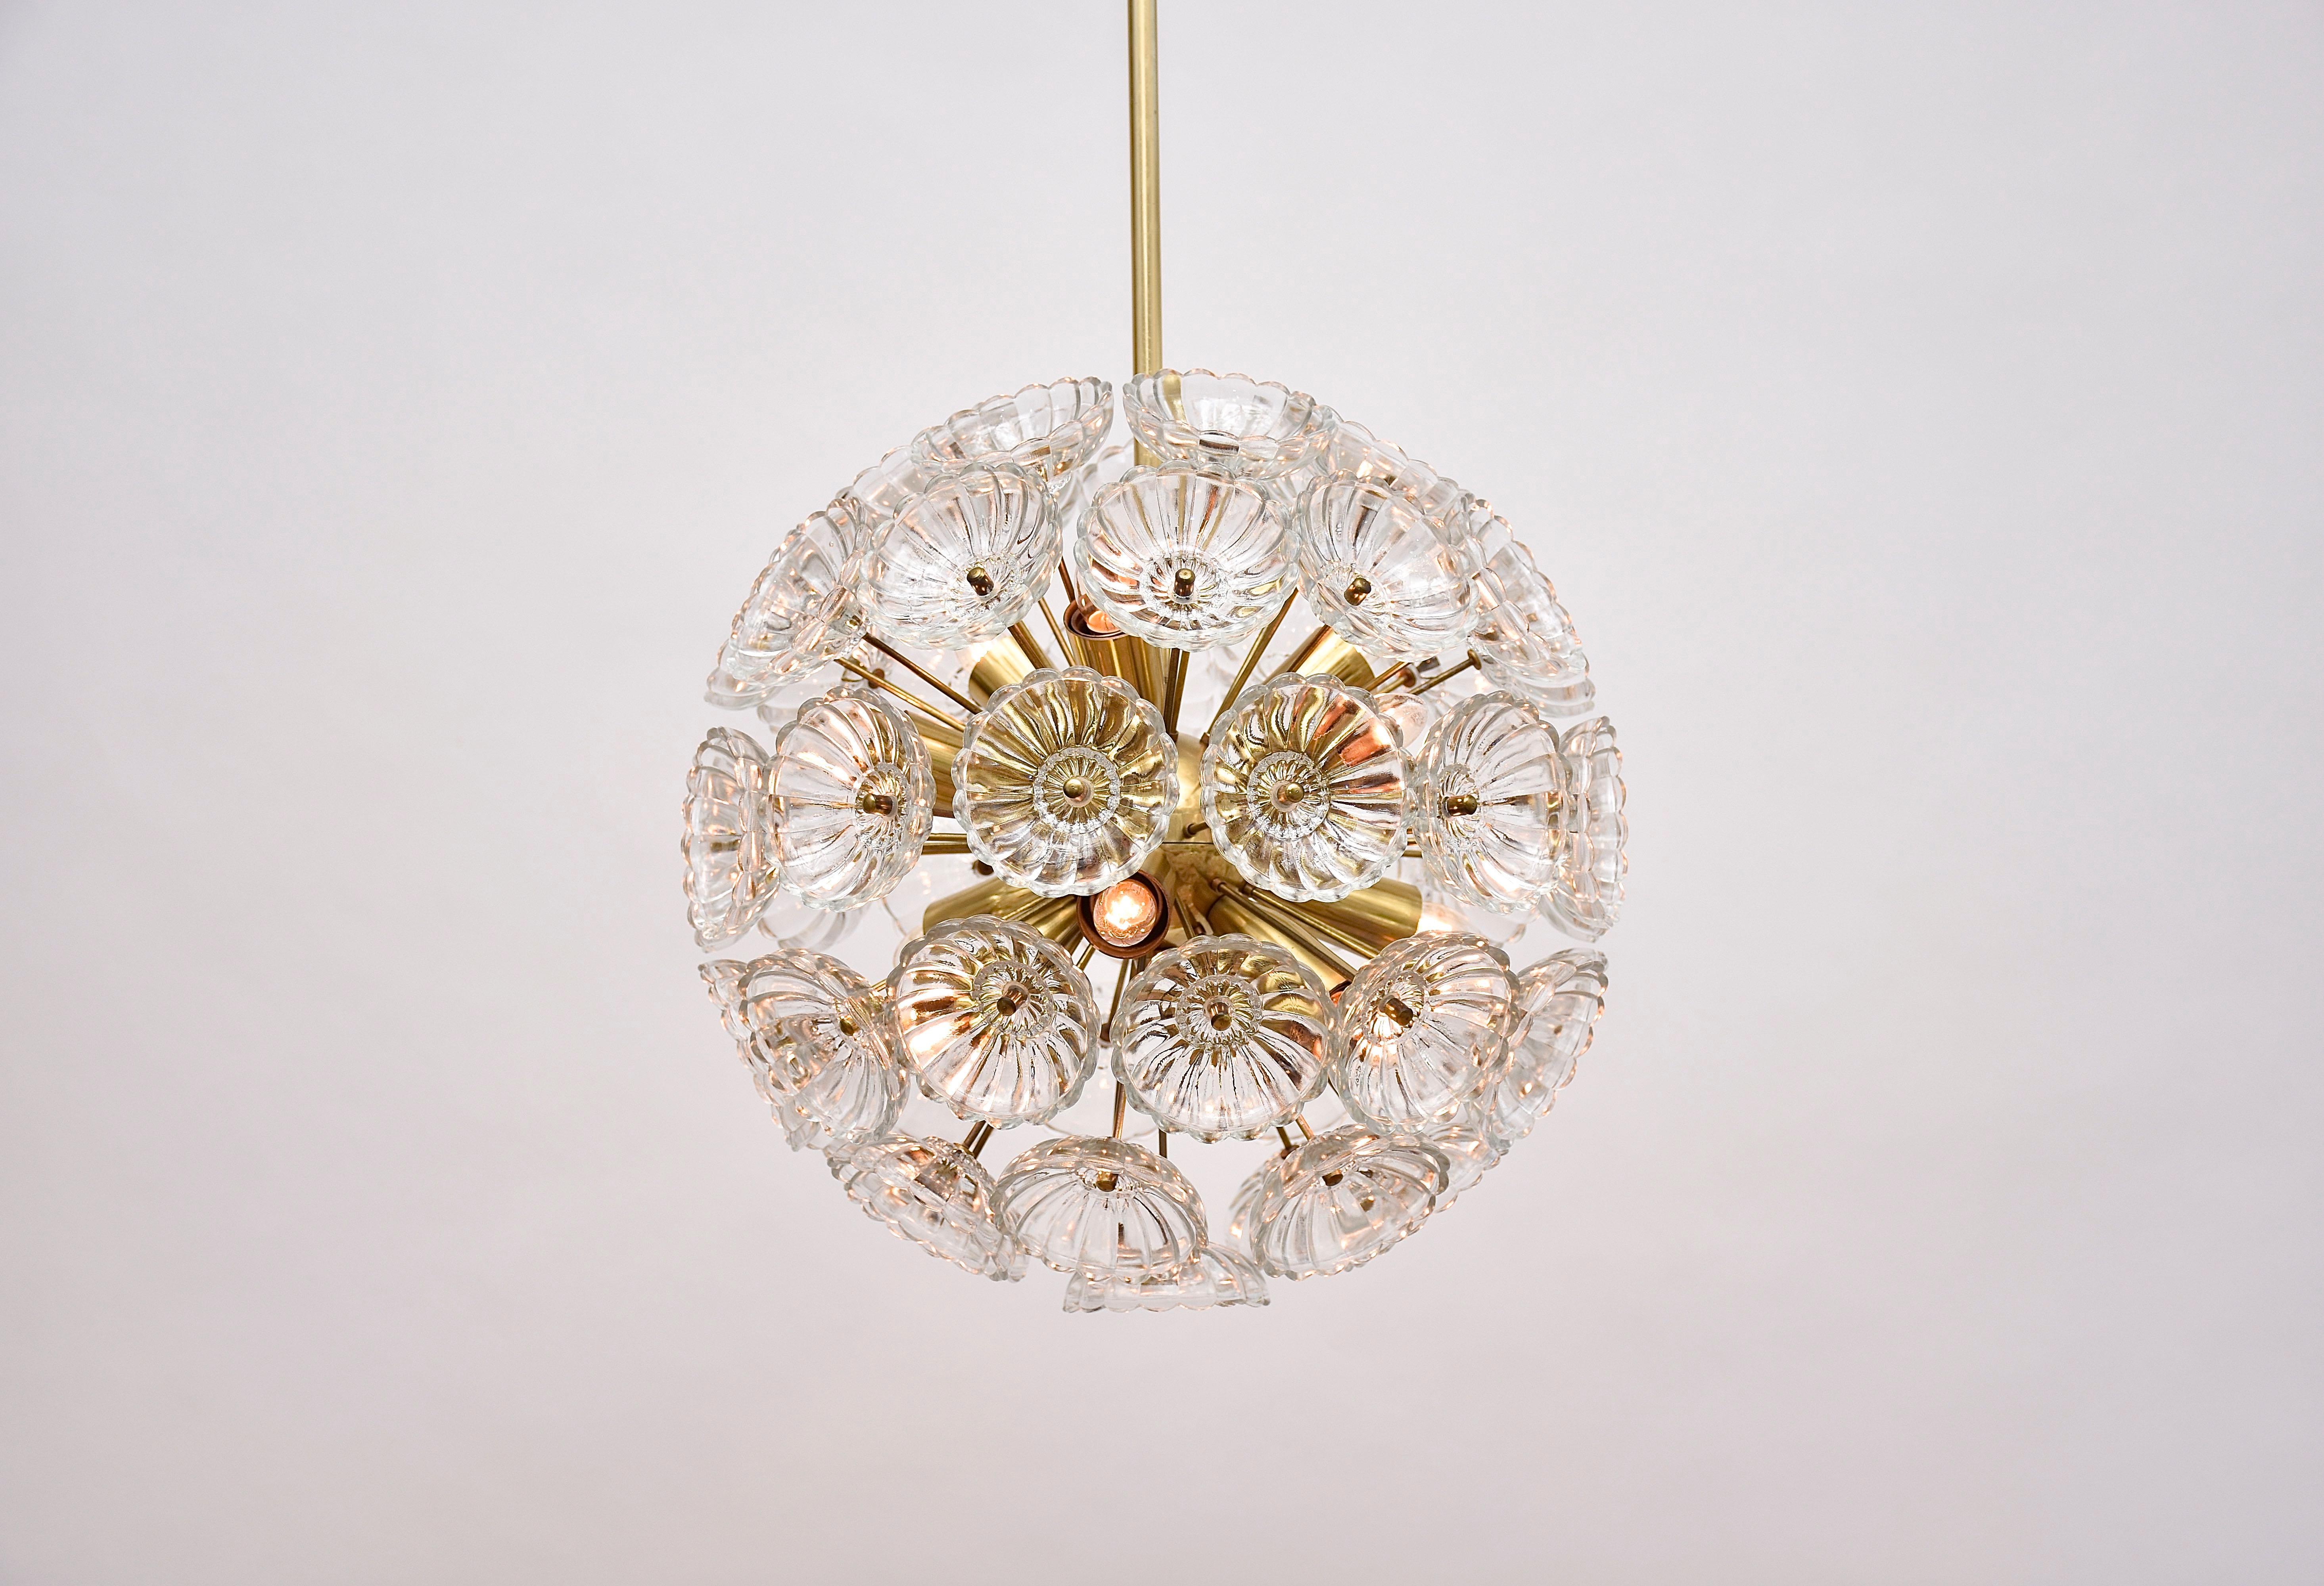 A stunning floral chandelier with 12 light.
With beautiful crystal glass flowers and a polished brass frame.
Period- ca. 1960, mid-century modern
Place of origin- Germany

We personally collected this beautiful chandelier in Berlin, Germany.
